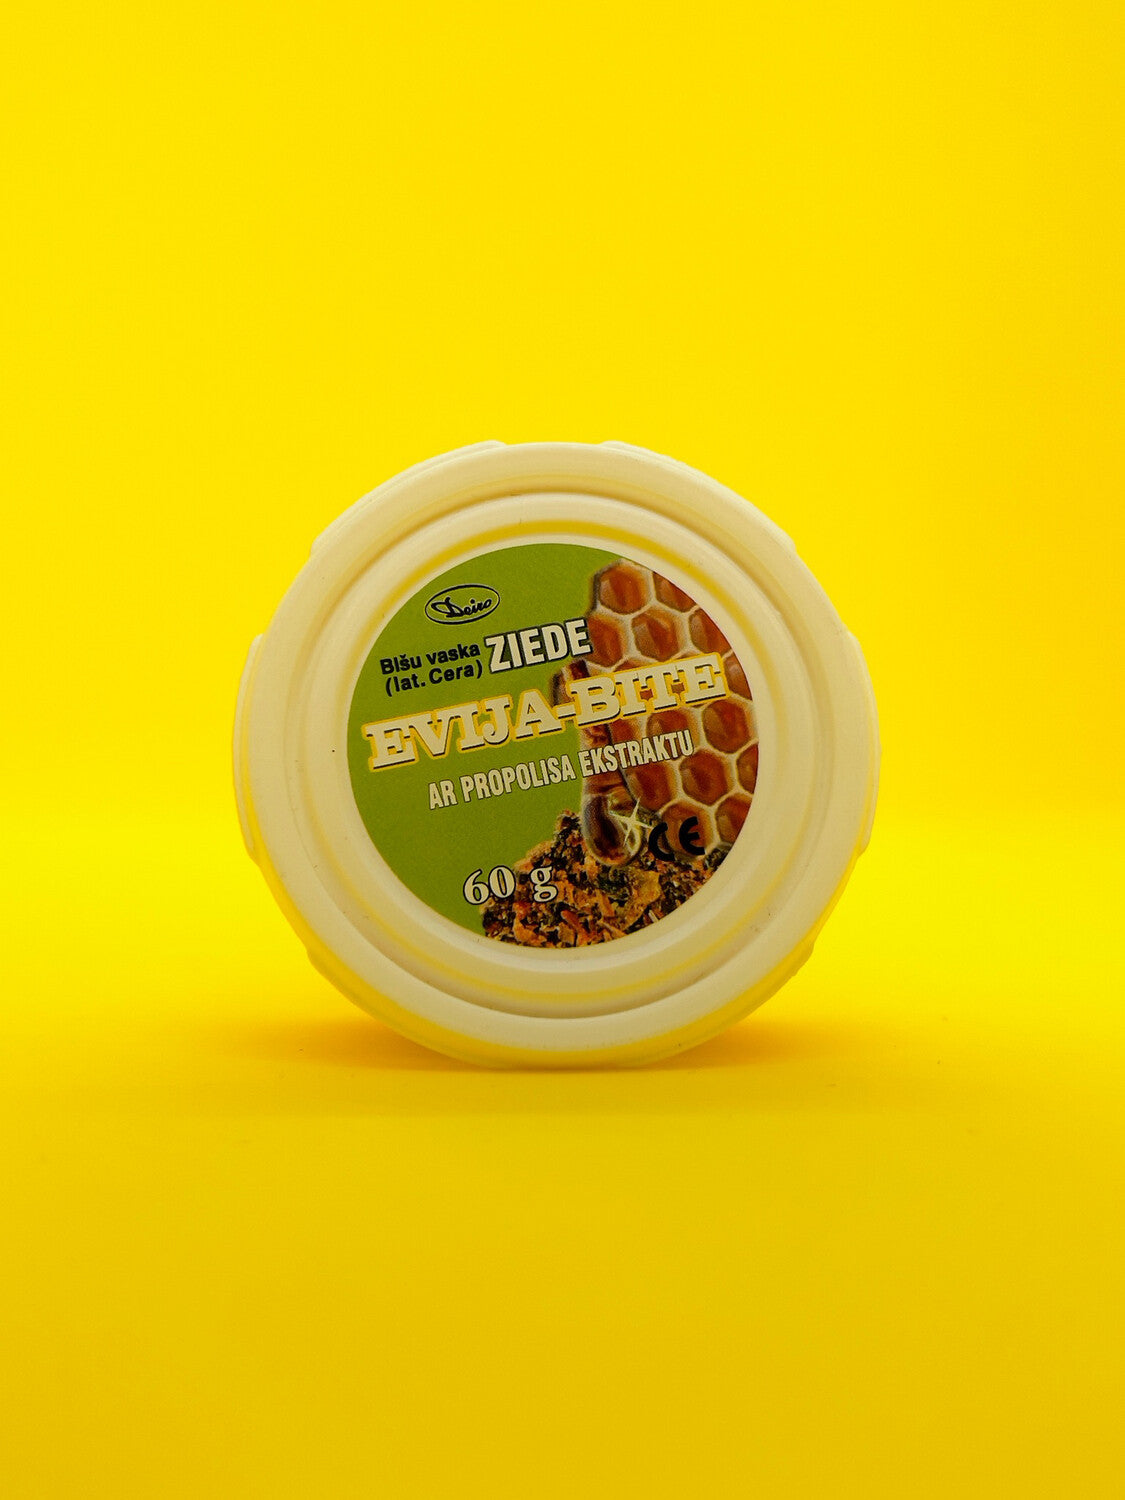 Beeswax ointment "Evija-Bite" with propolis extract 60g